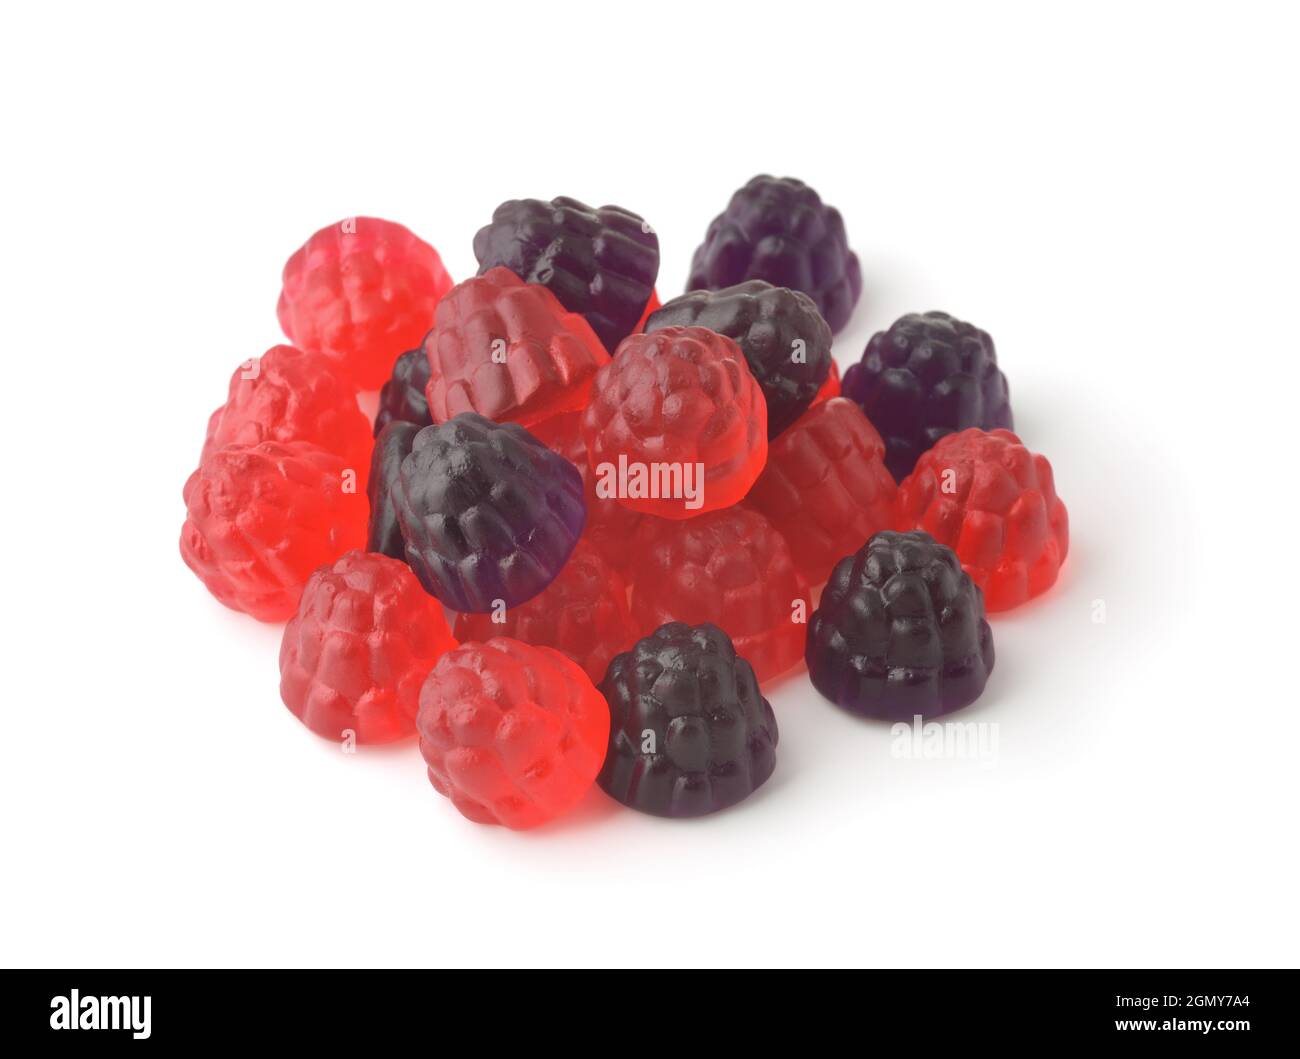 Blackberry and raspberry jelly gummy candies isolated on white Stock Photo